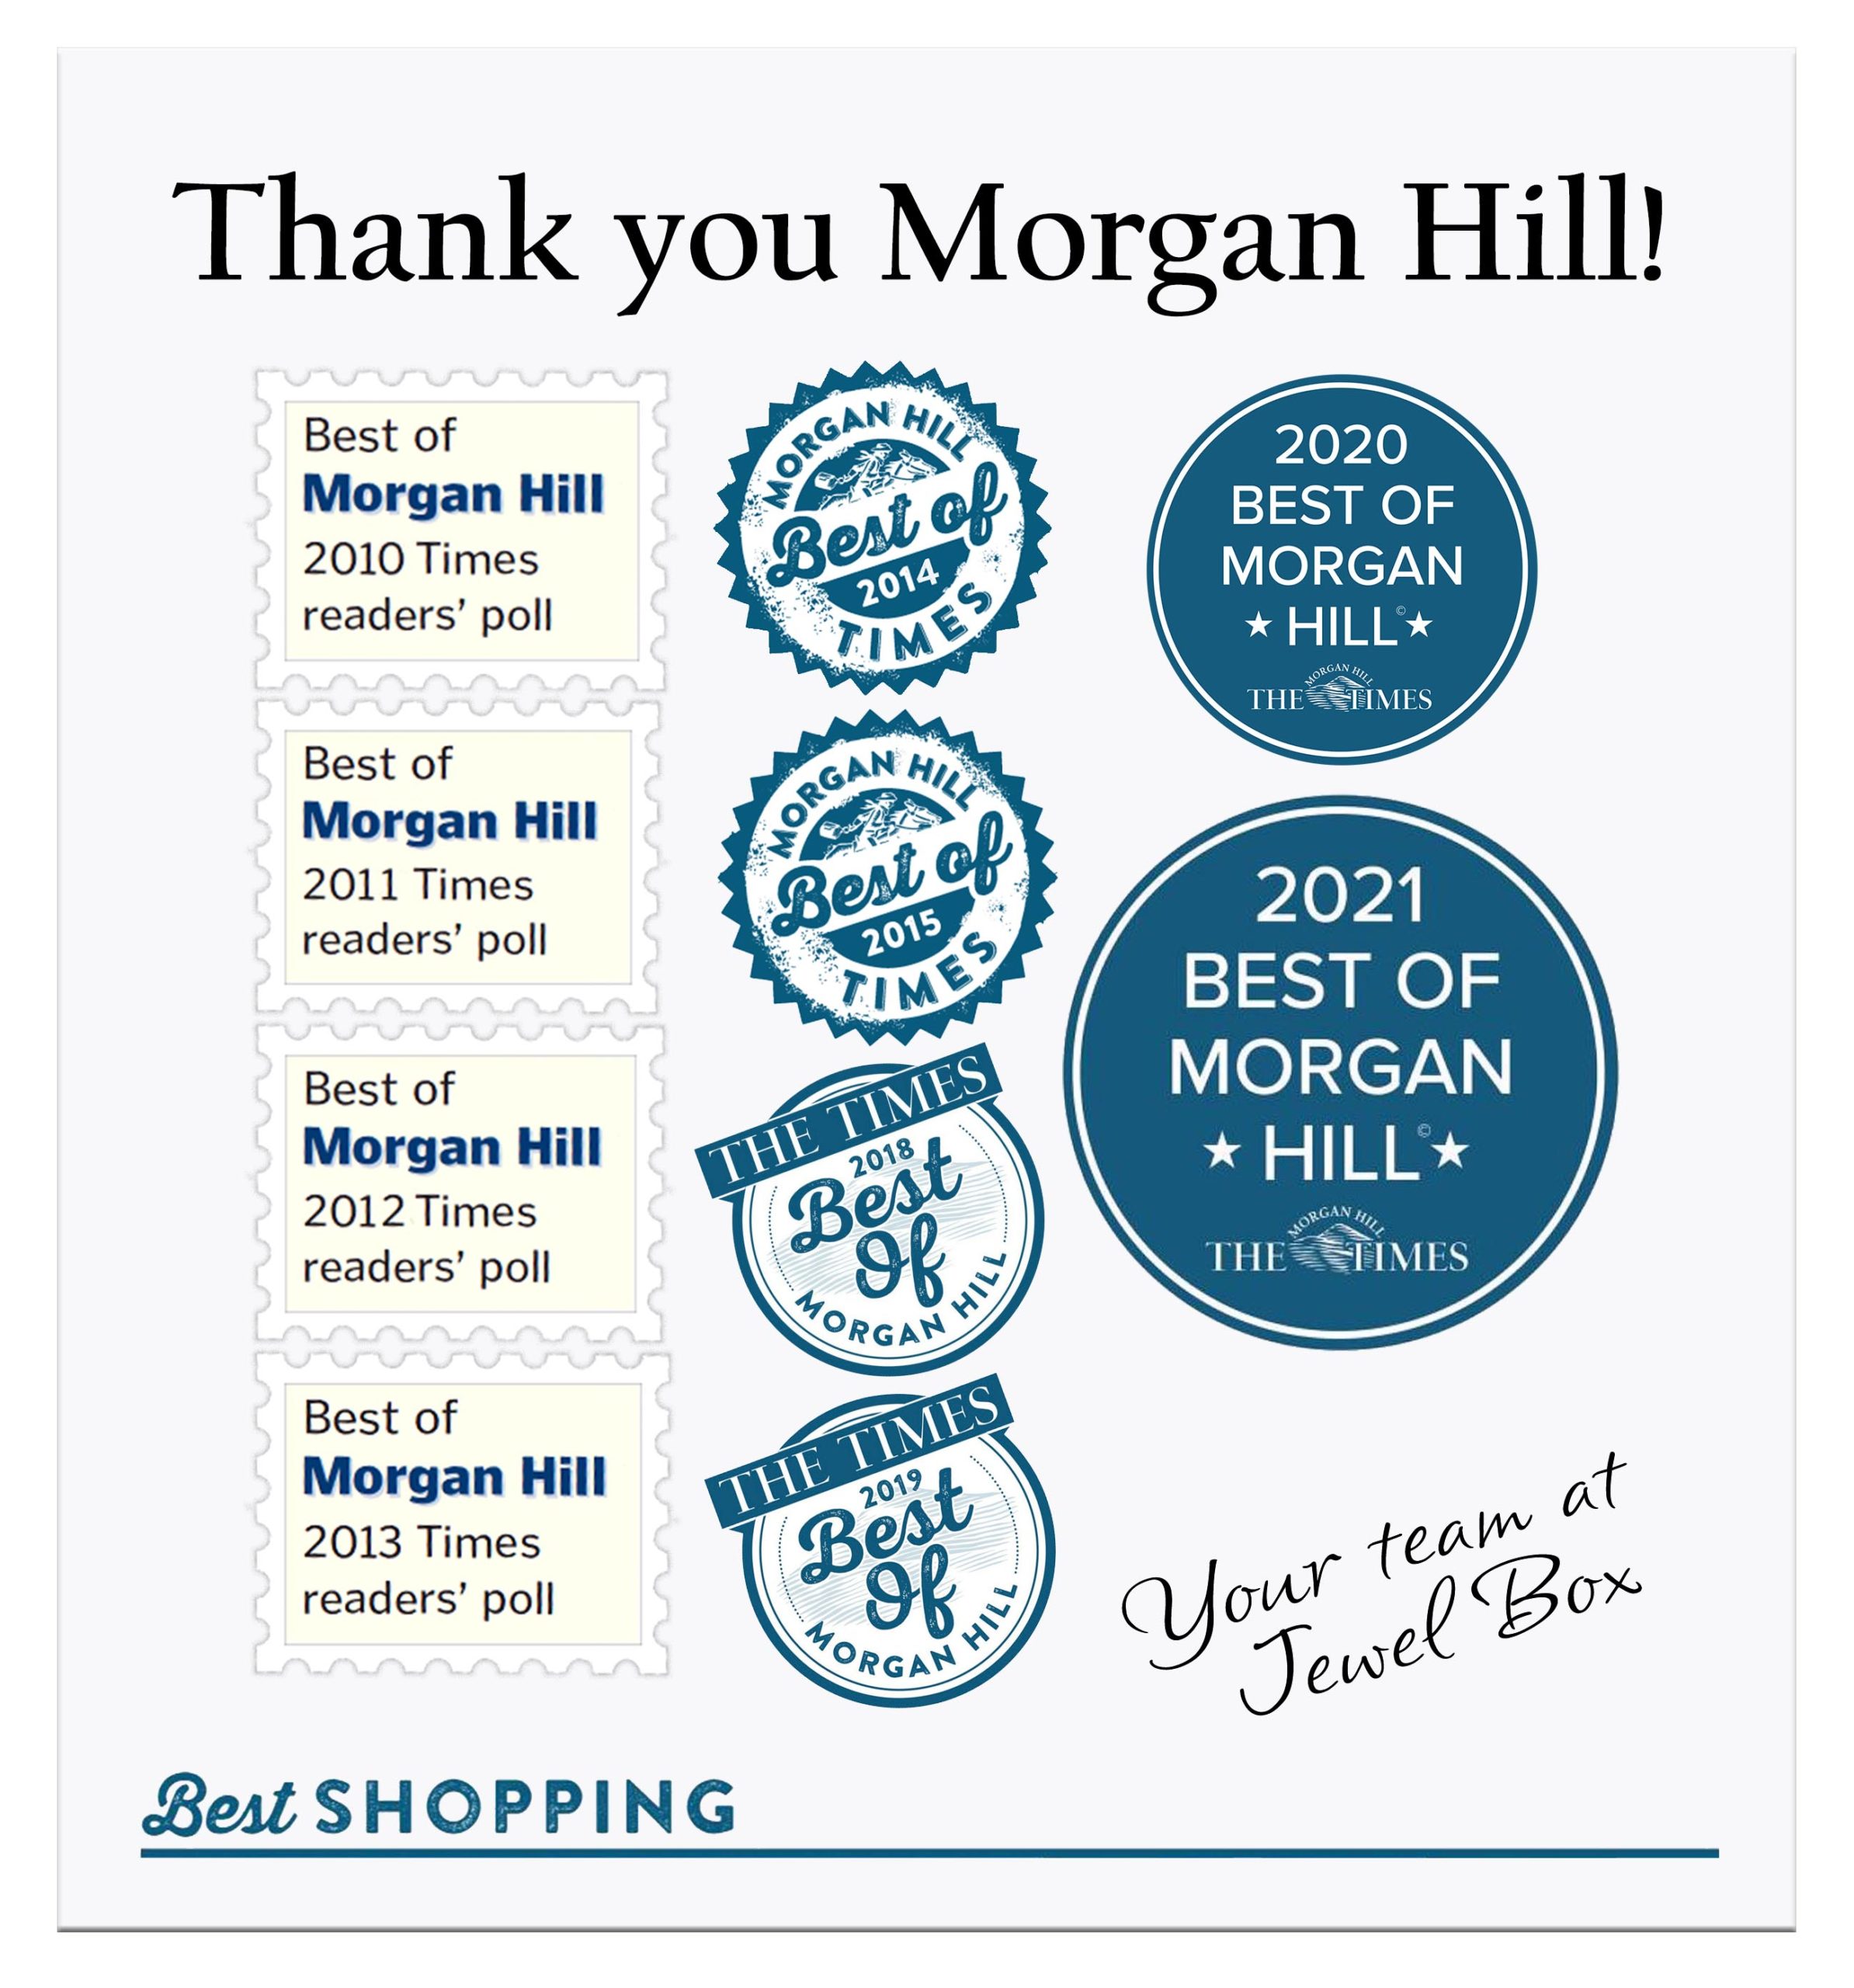 thank you morgan hill in big lettering and best of morgan hill yearly awards and times readers' poll